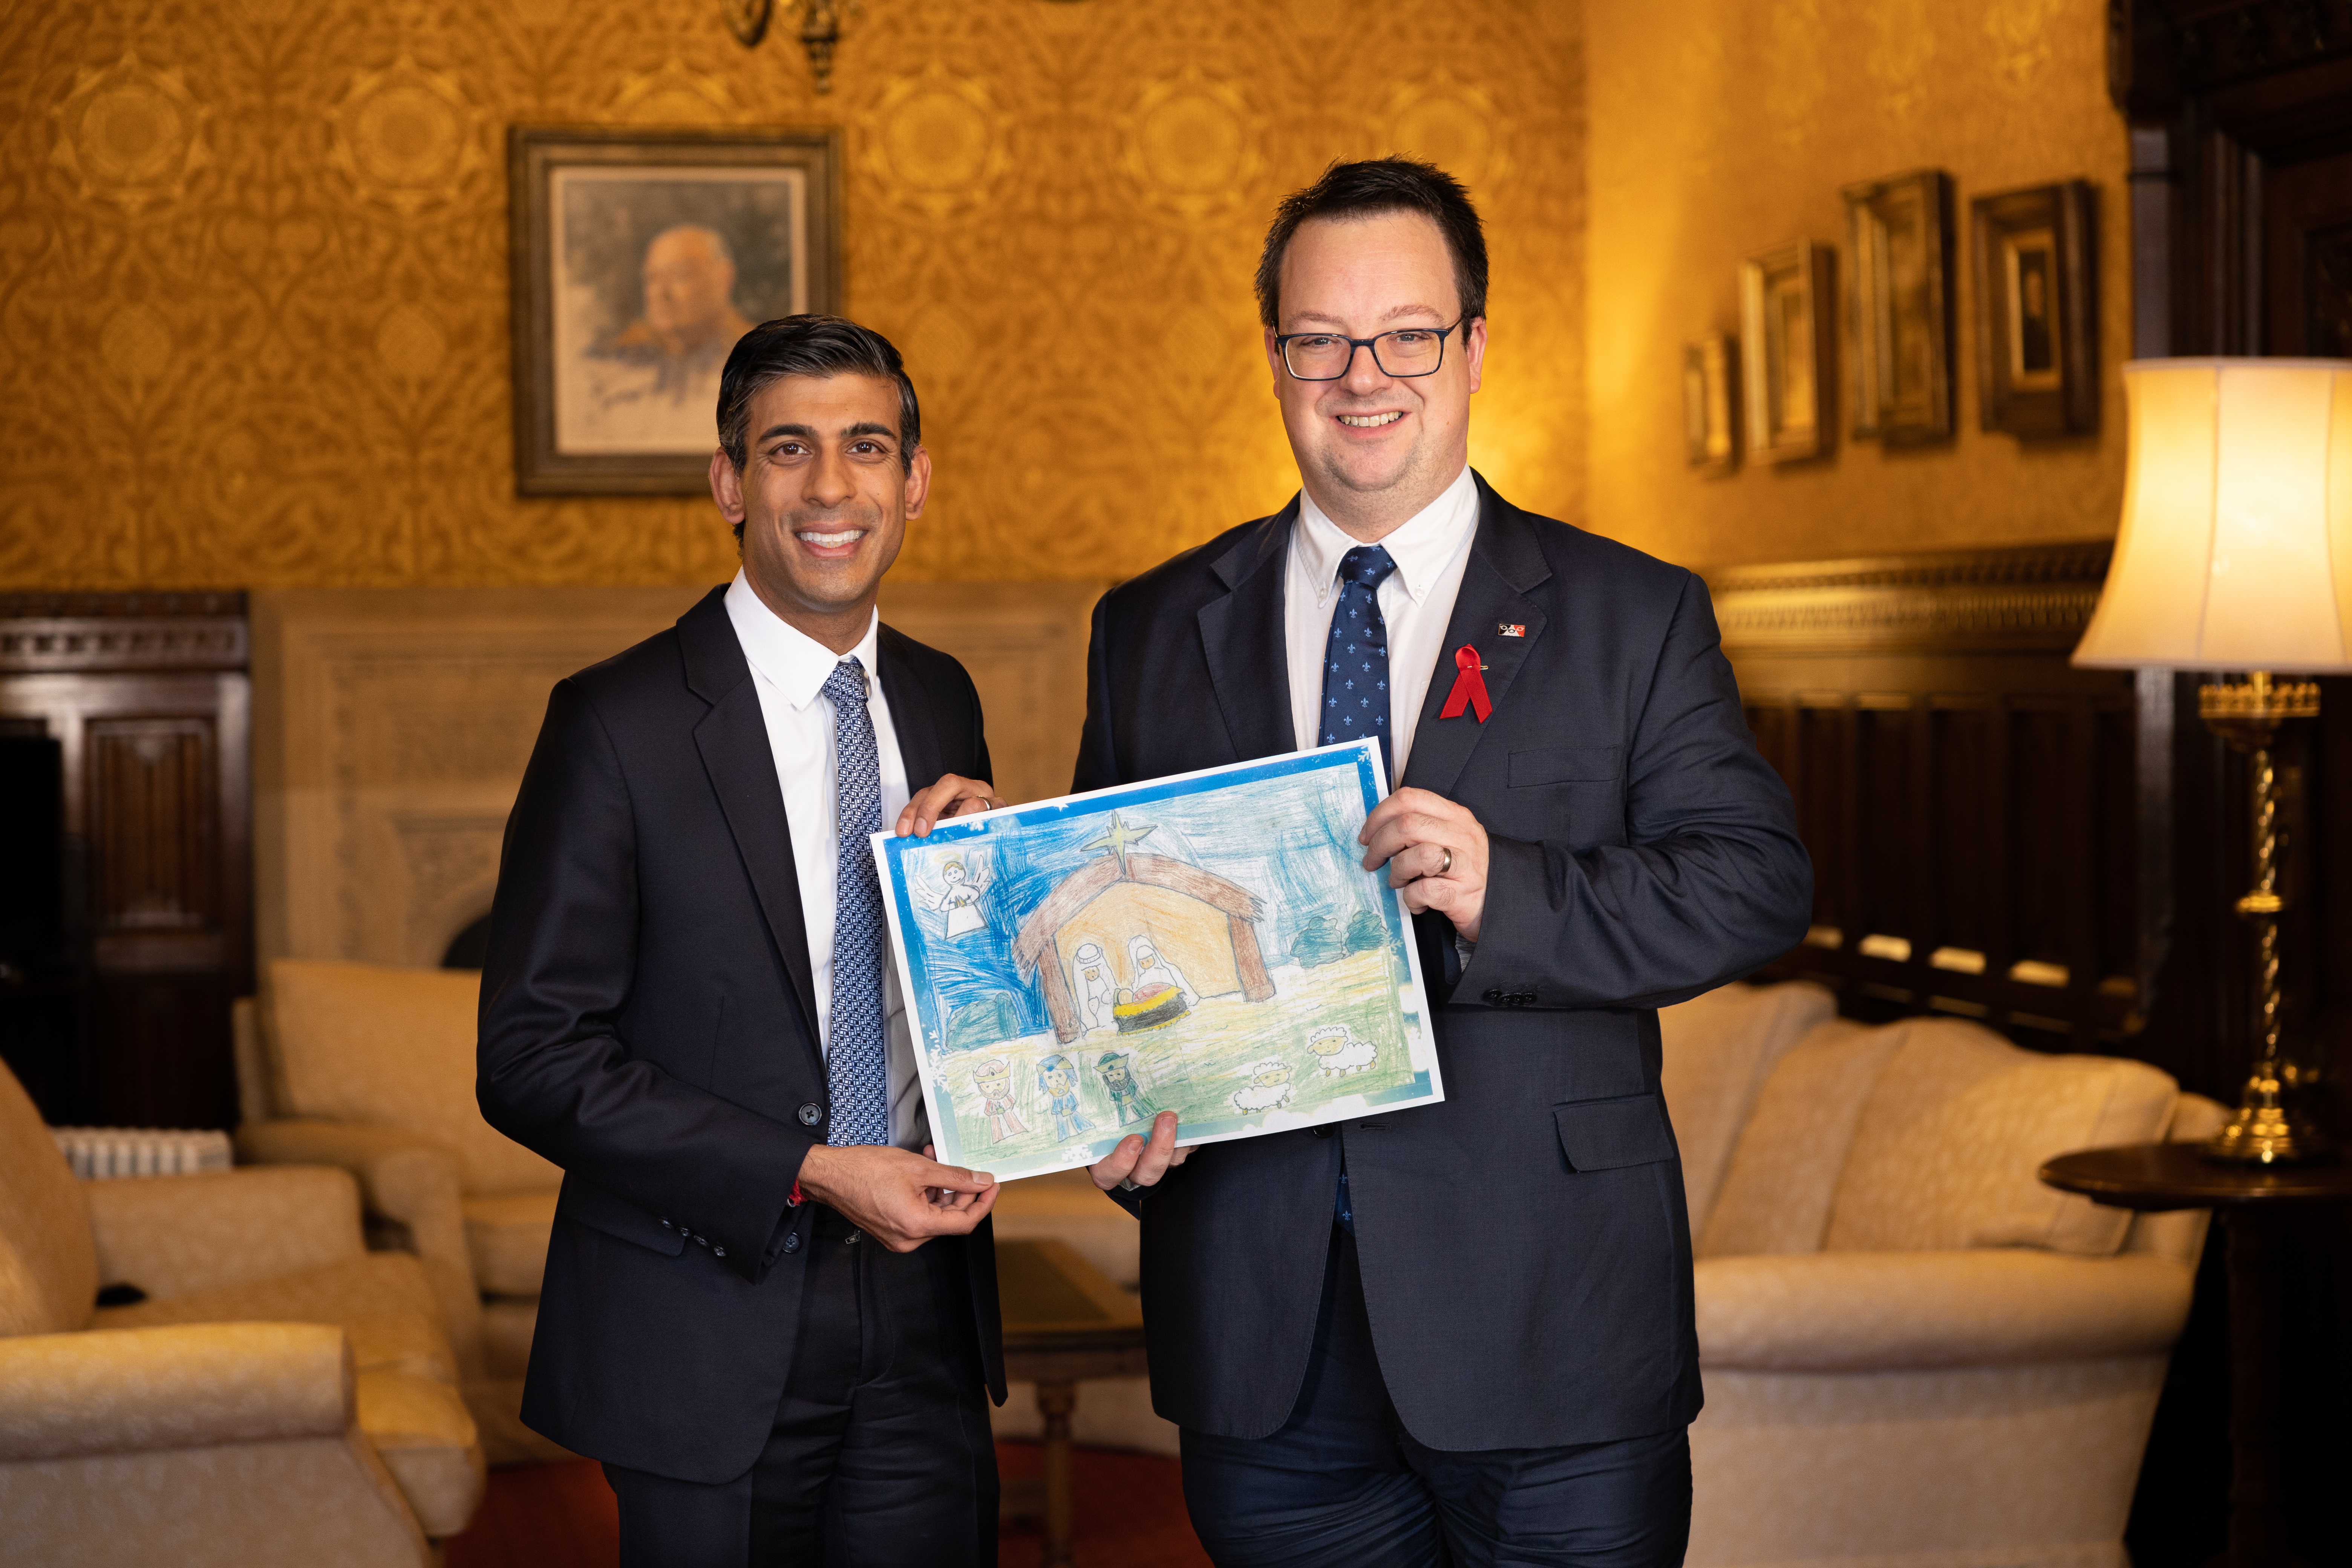 Mike Wood MP with PM Rishi Sunak holding winning entry to Mike's 2022 Christmas card competition